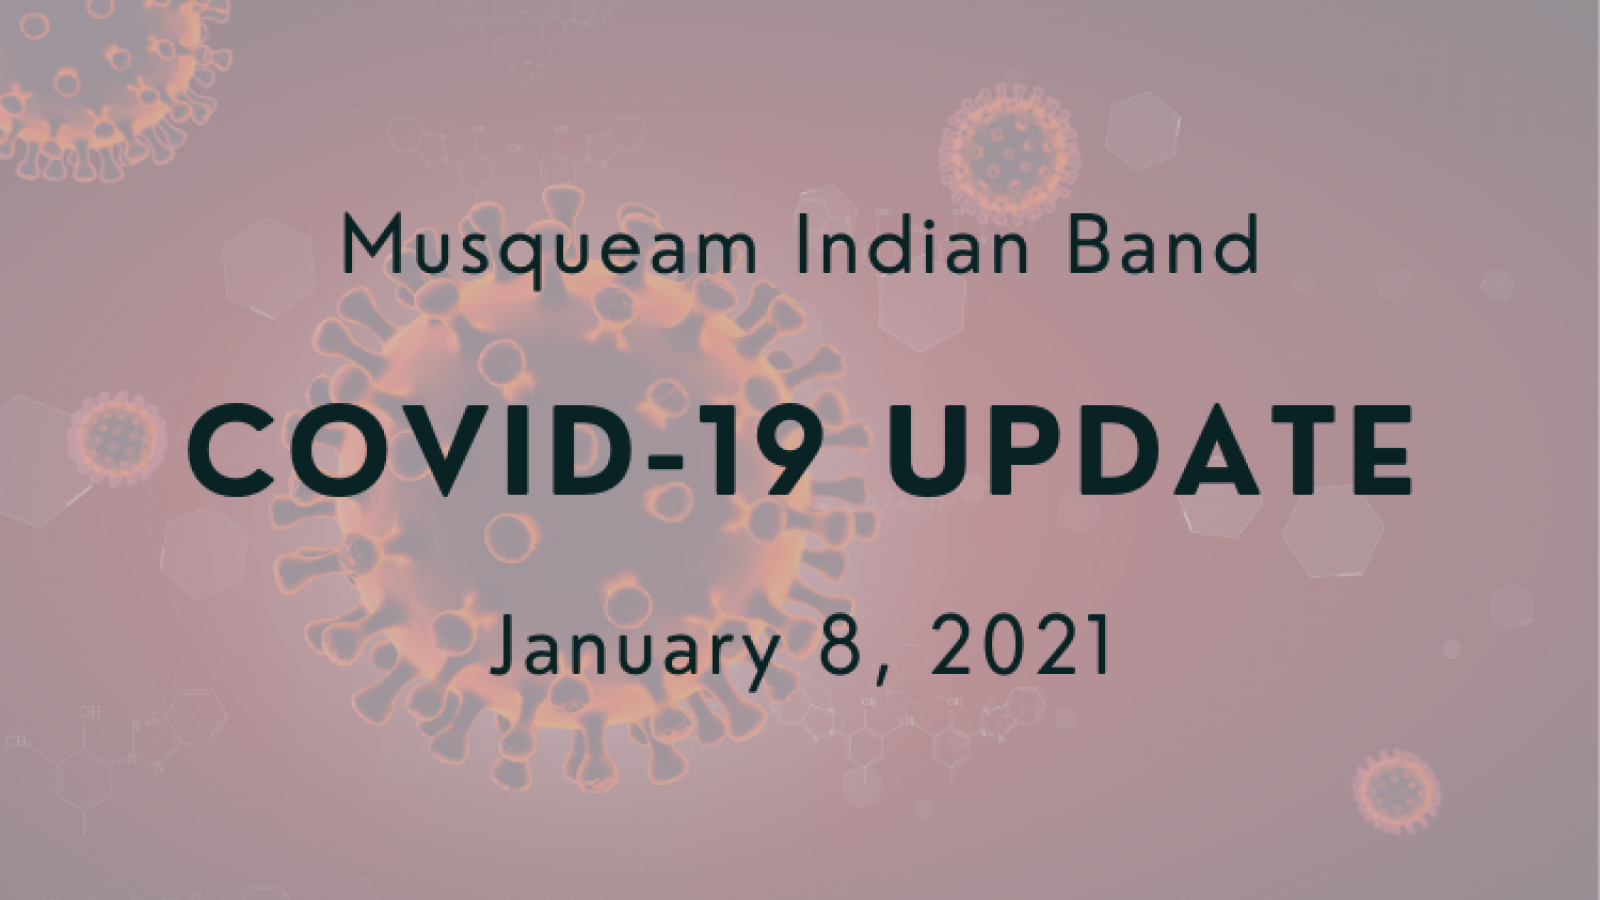 Musqueam Covid-19 update for January 8, 2021